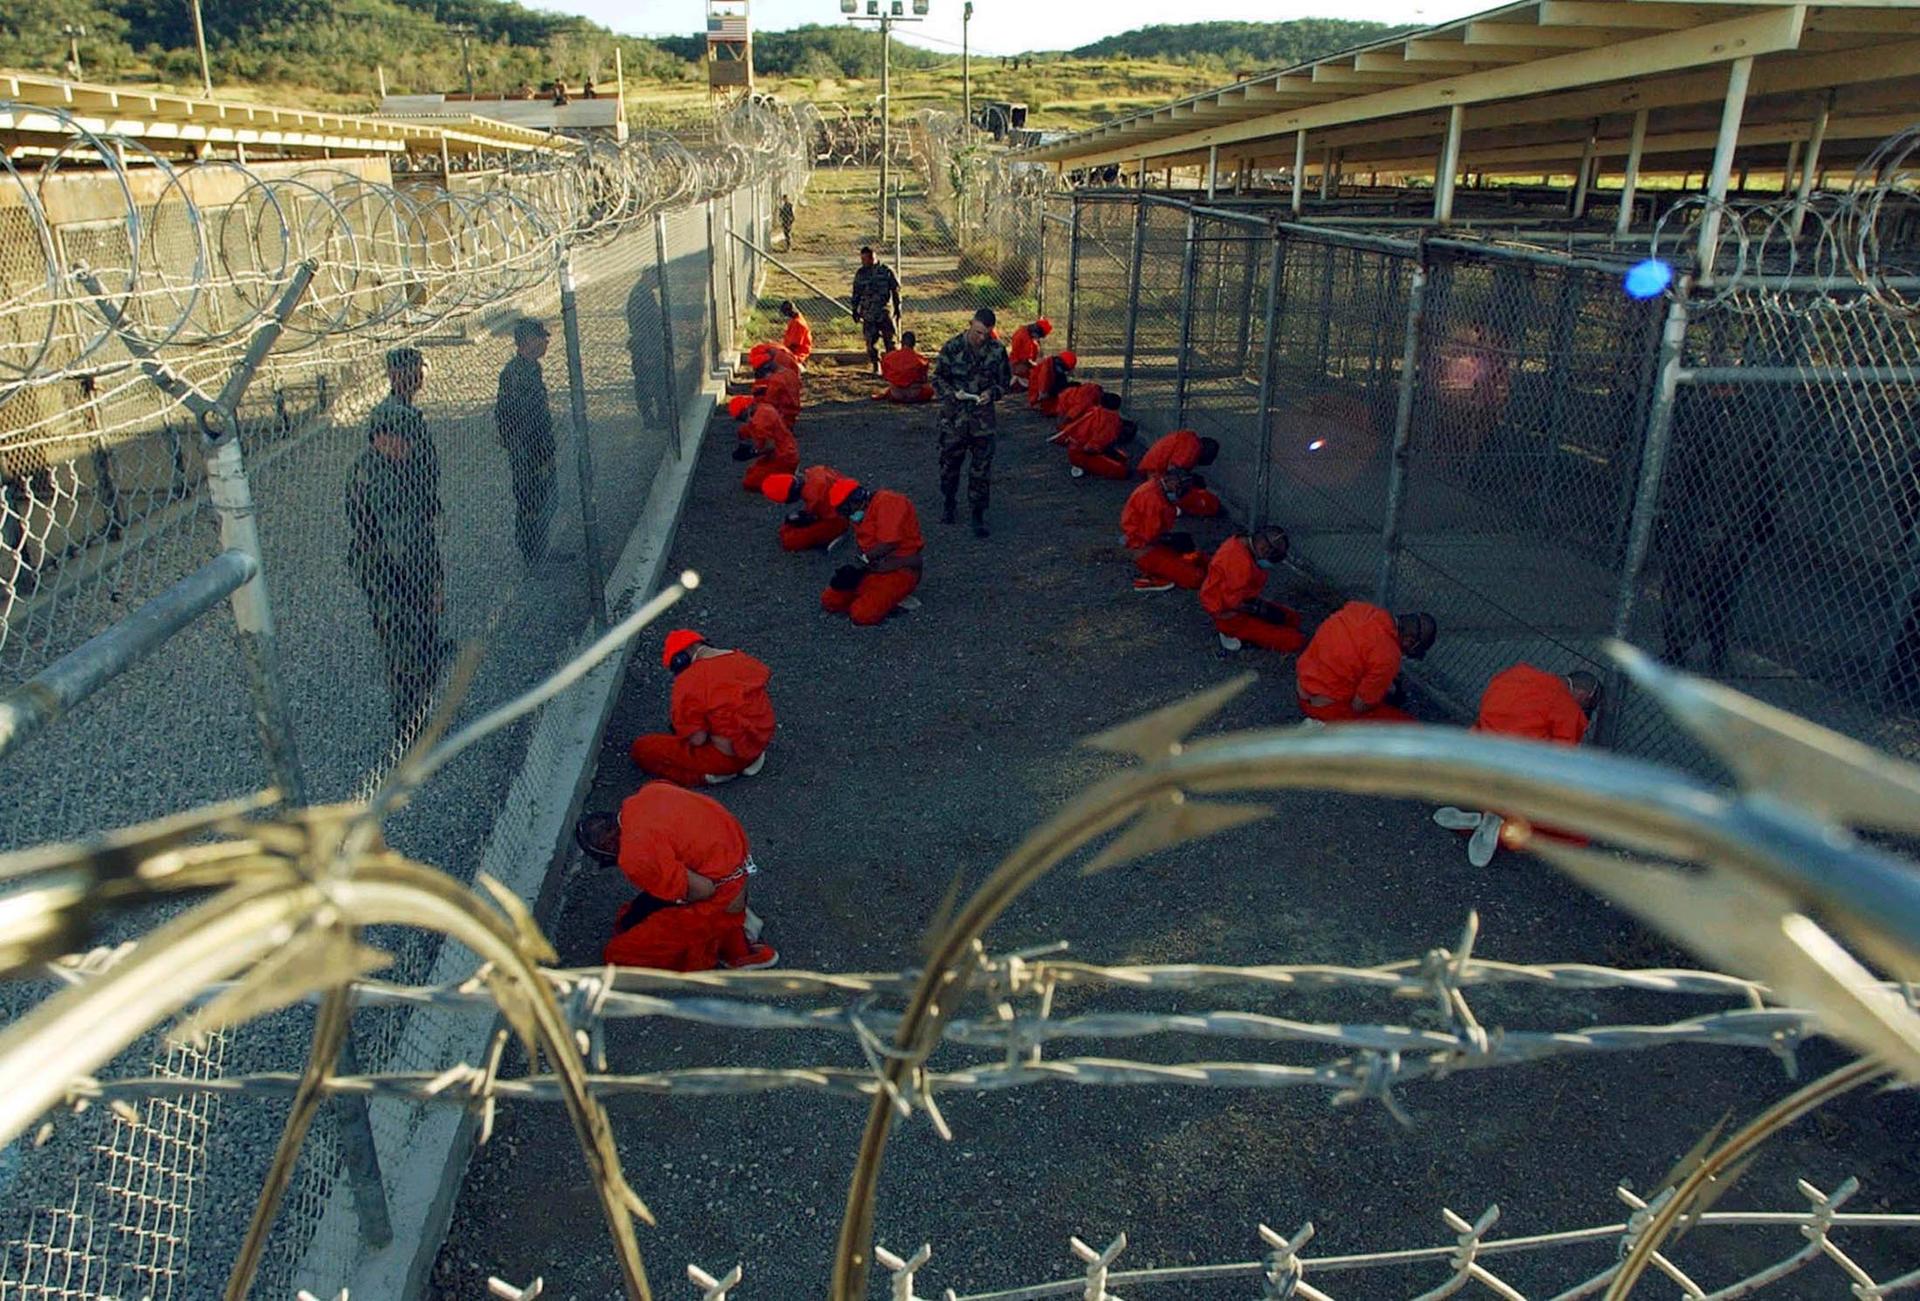 Detainees in orange jumpsuits sit in a holding area under the watchful eyes of military police during inprocessing at the temporary detention facility at Guantanamo Bay's Camp X-Ray in this January 11, 2002 file photograph.